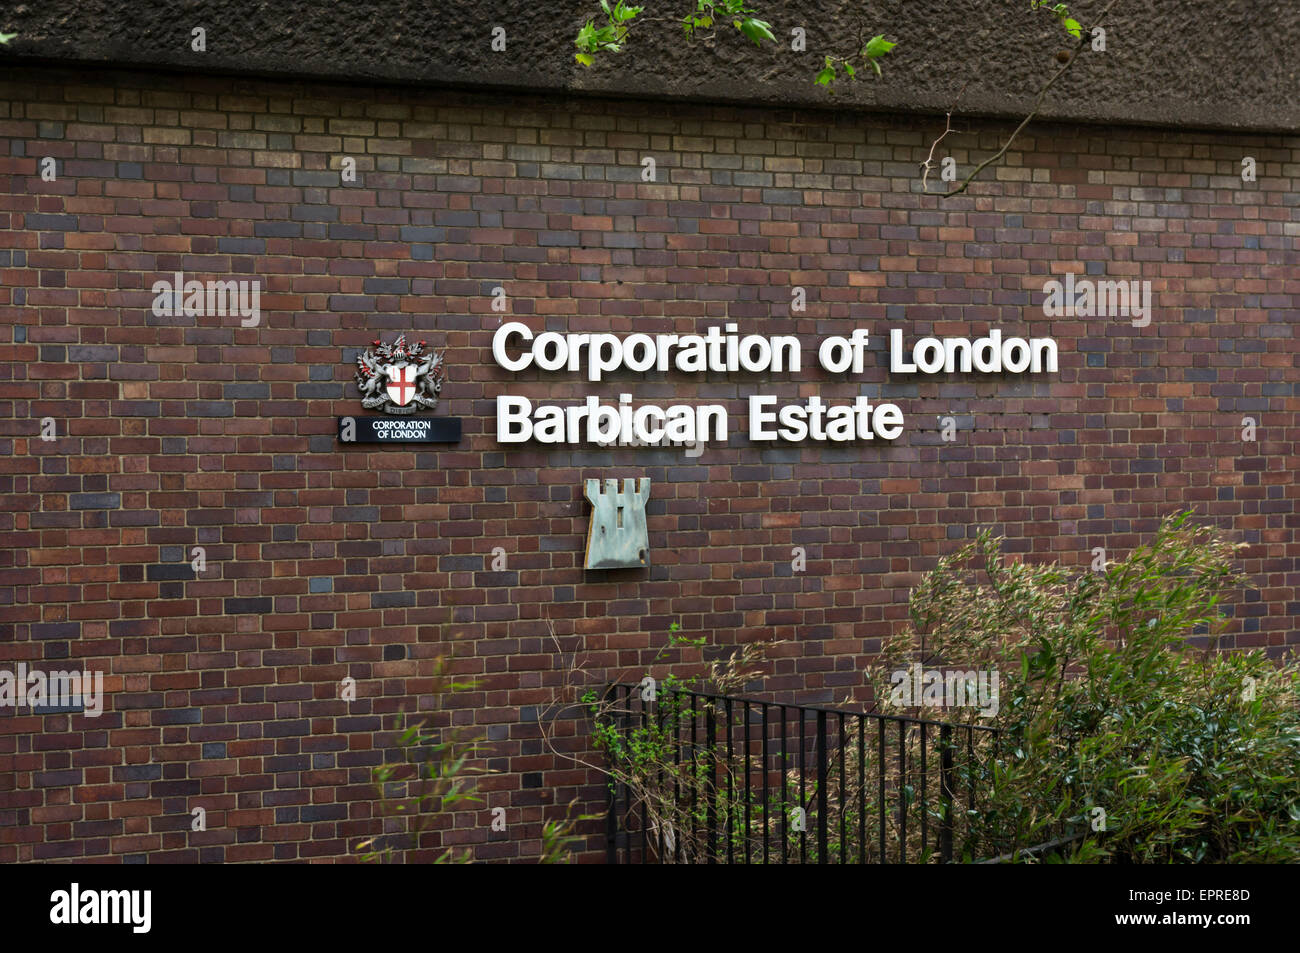 Corporation of London Barbican Estate sign on brick wall. Stock Photo